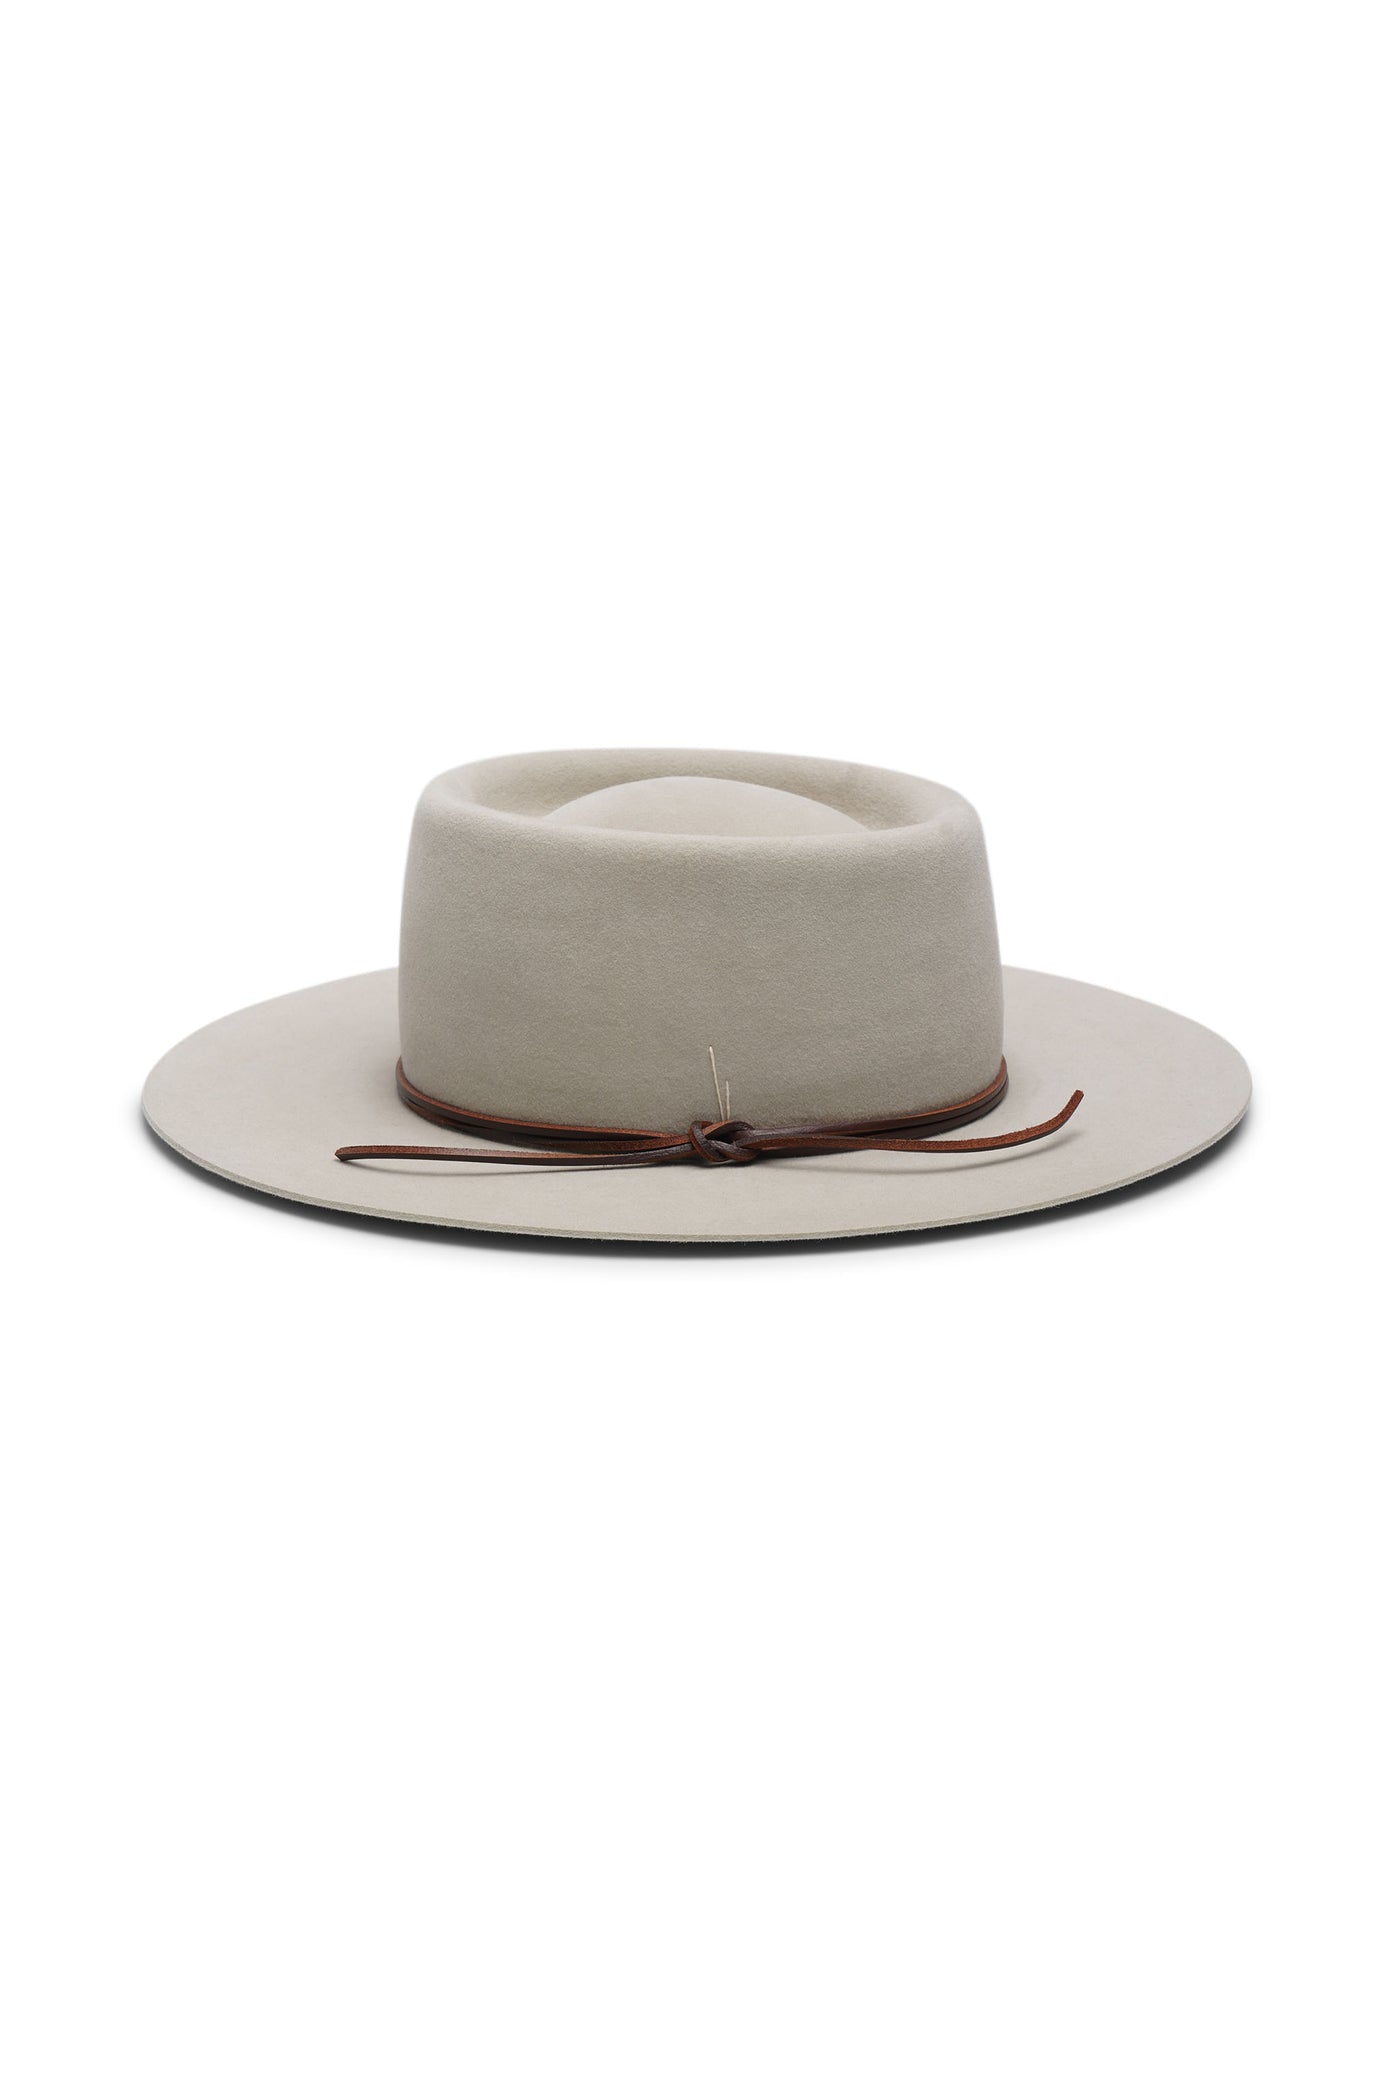 Beige bolero fur felt hat with a wide brim and telescope crown. Unisex hat style in various sizes and colors. We ship worldwide. Shop now. Each SoonNoon hat is handmade with unique character in Stockholm, Sweden.